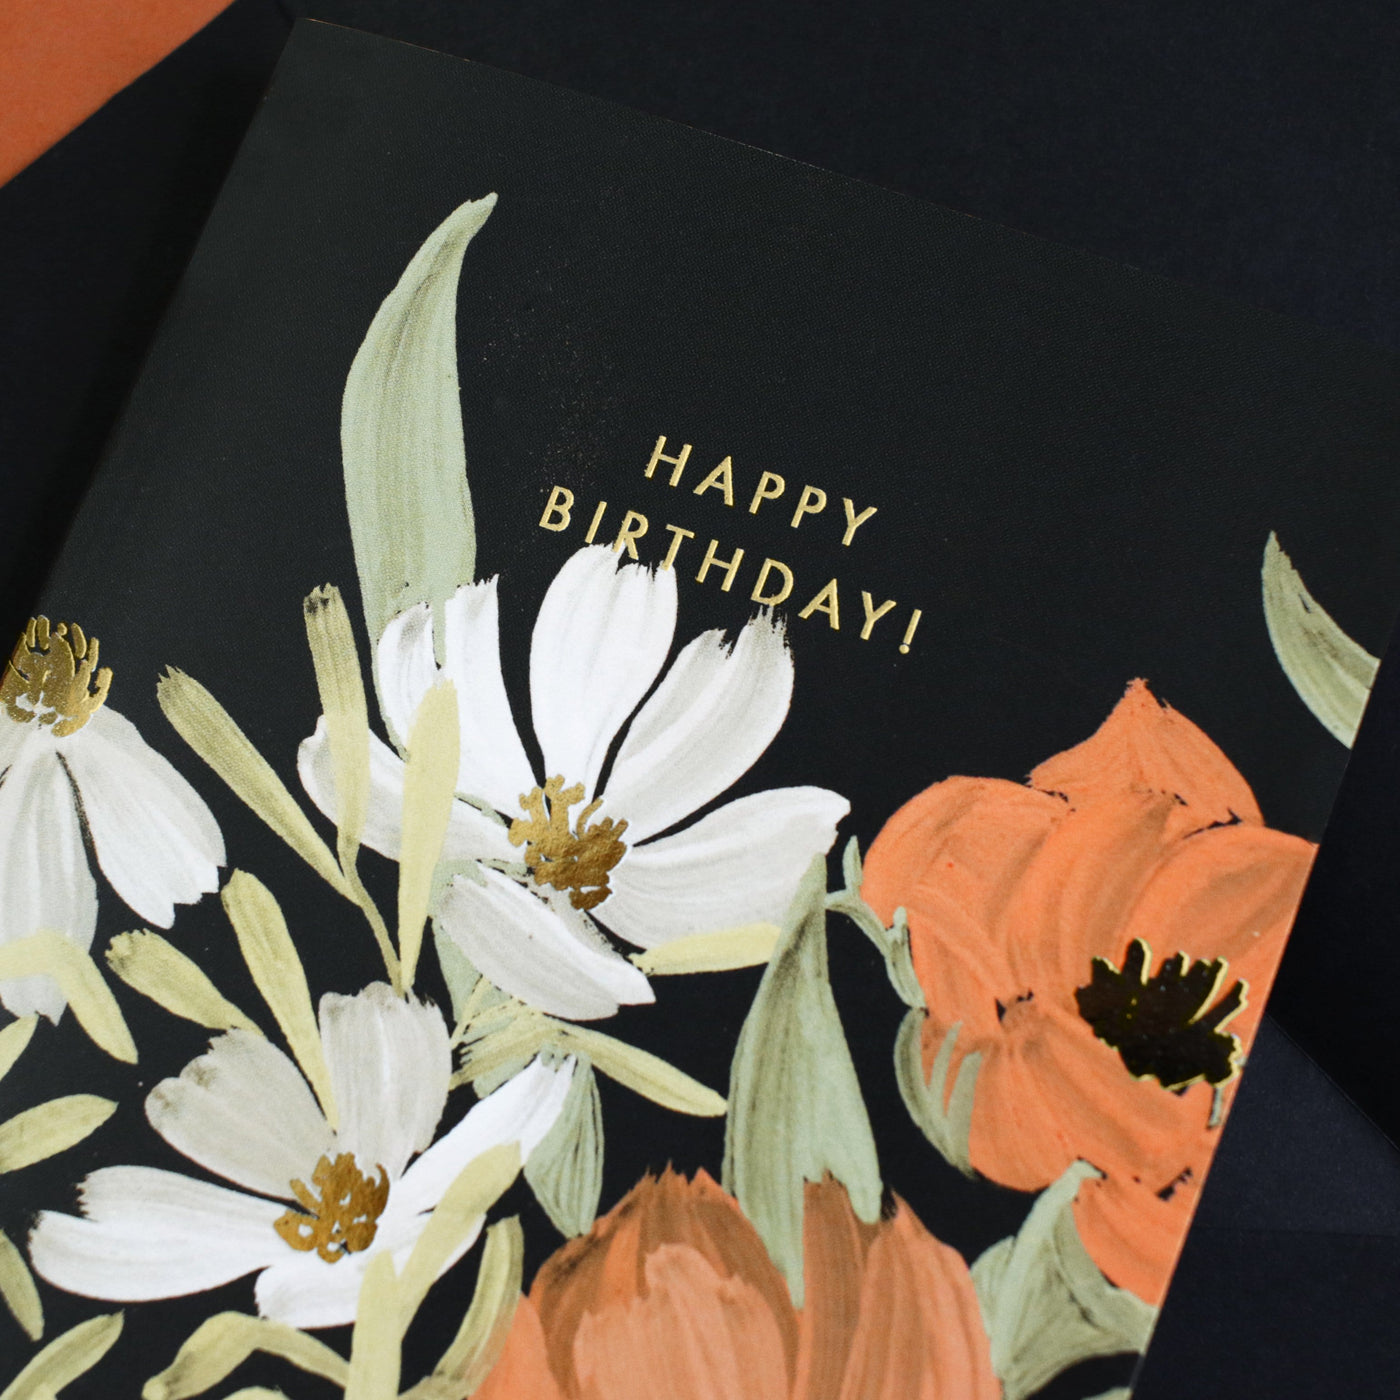 Illustrated Black Floral Card With White Orange And Blue Flowers And Gold Happy Birthday Lettering - Annie Dornan Smith